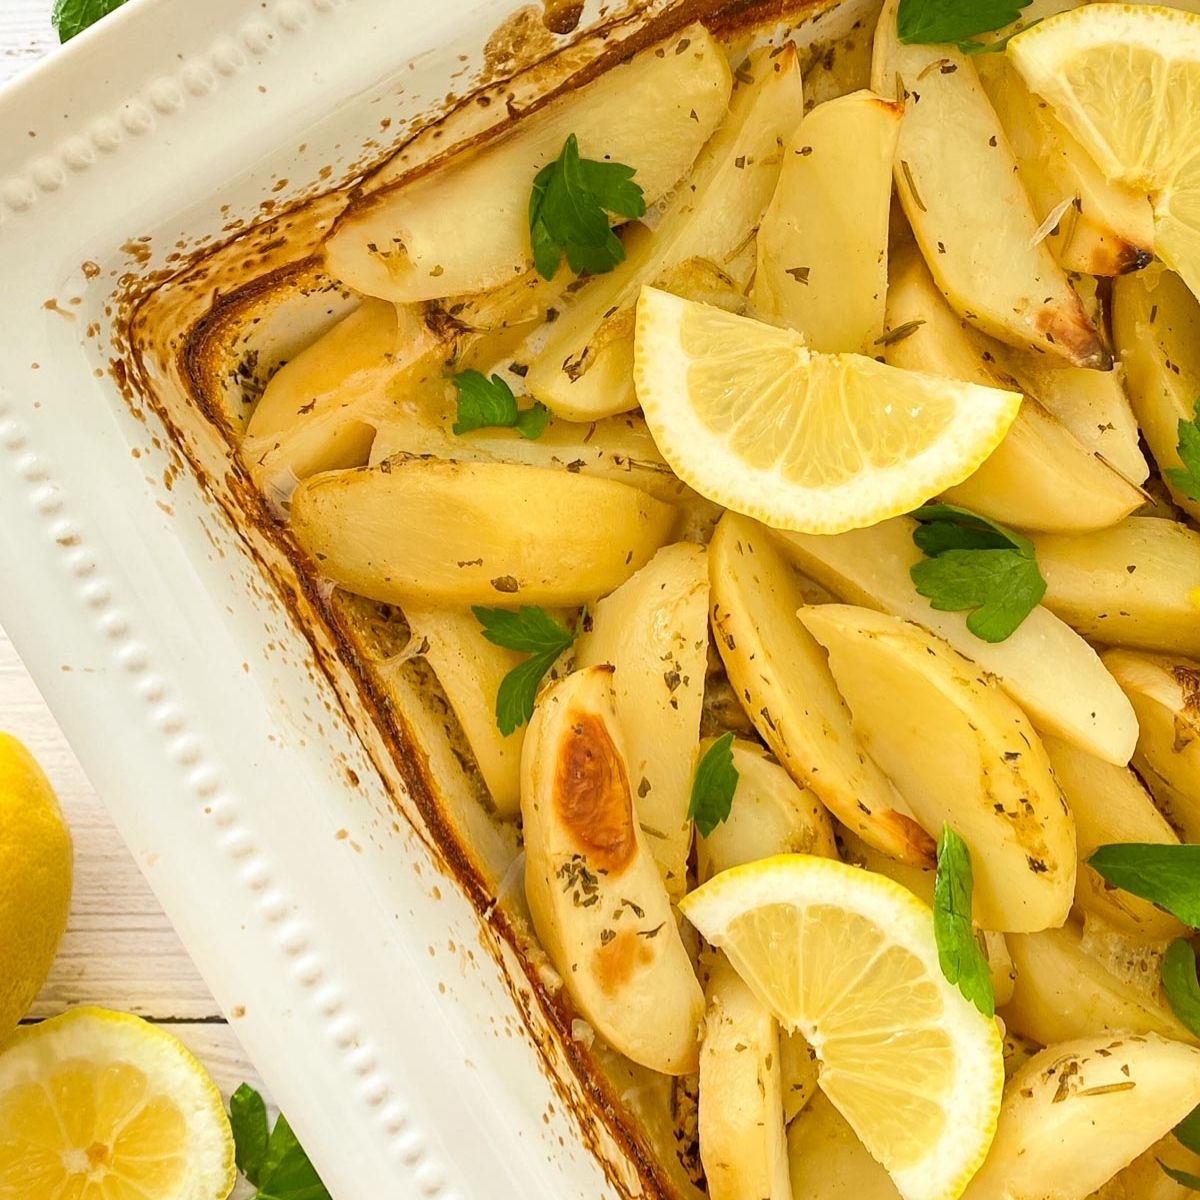 Roasted potatoes in white tray with lemon wedges and parsley garnish.